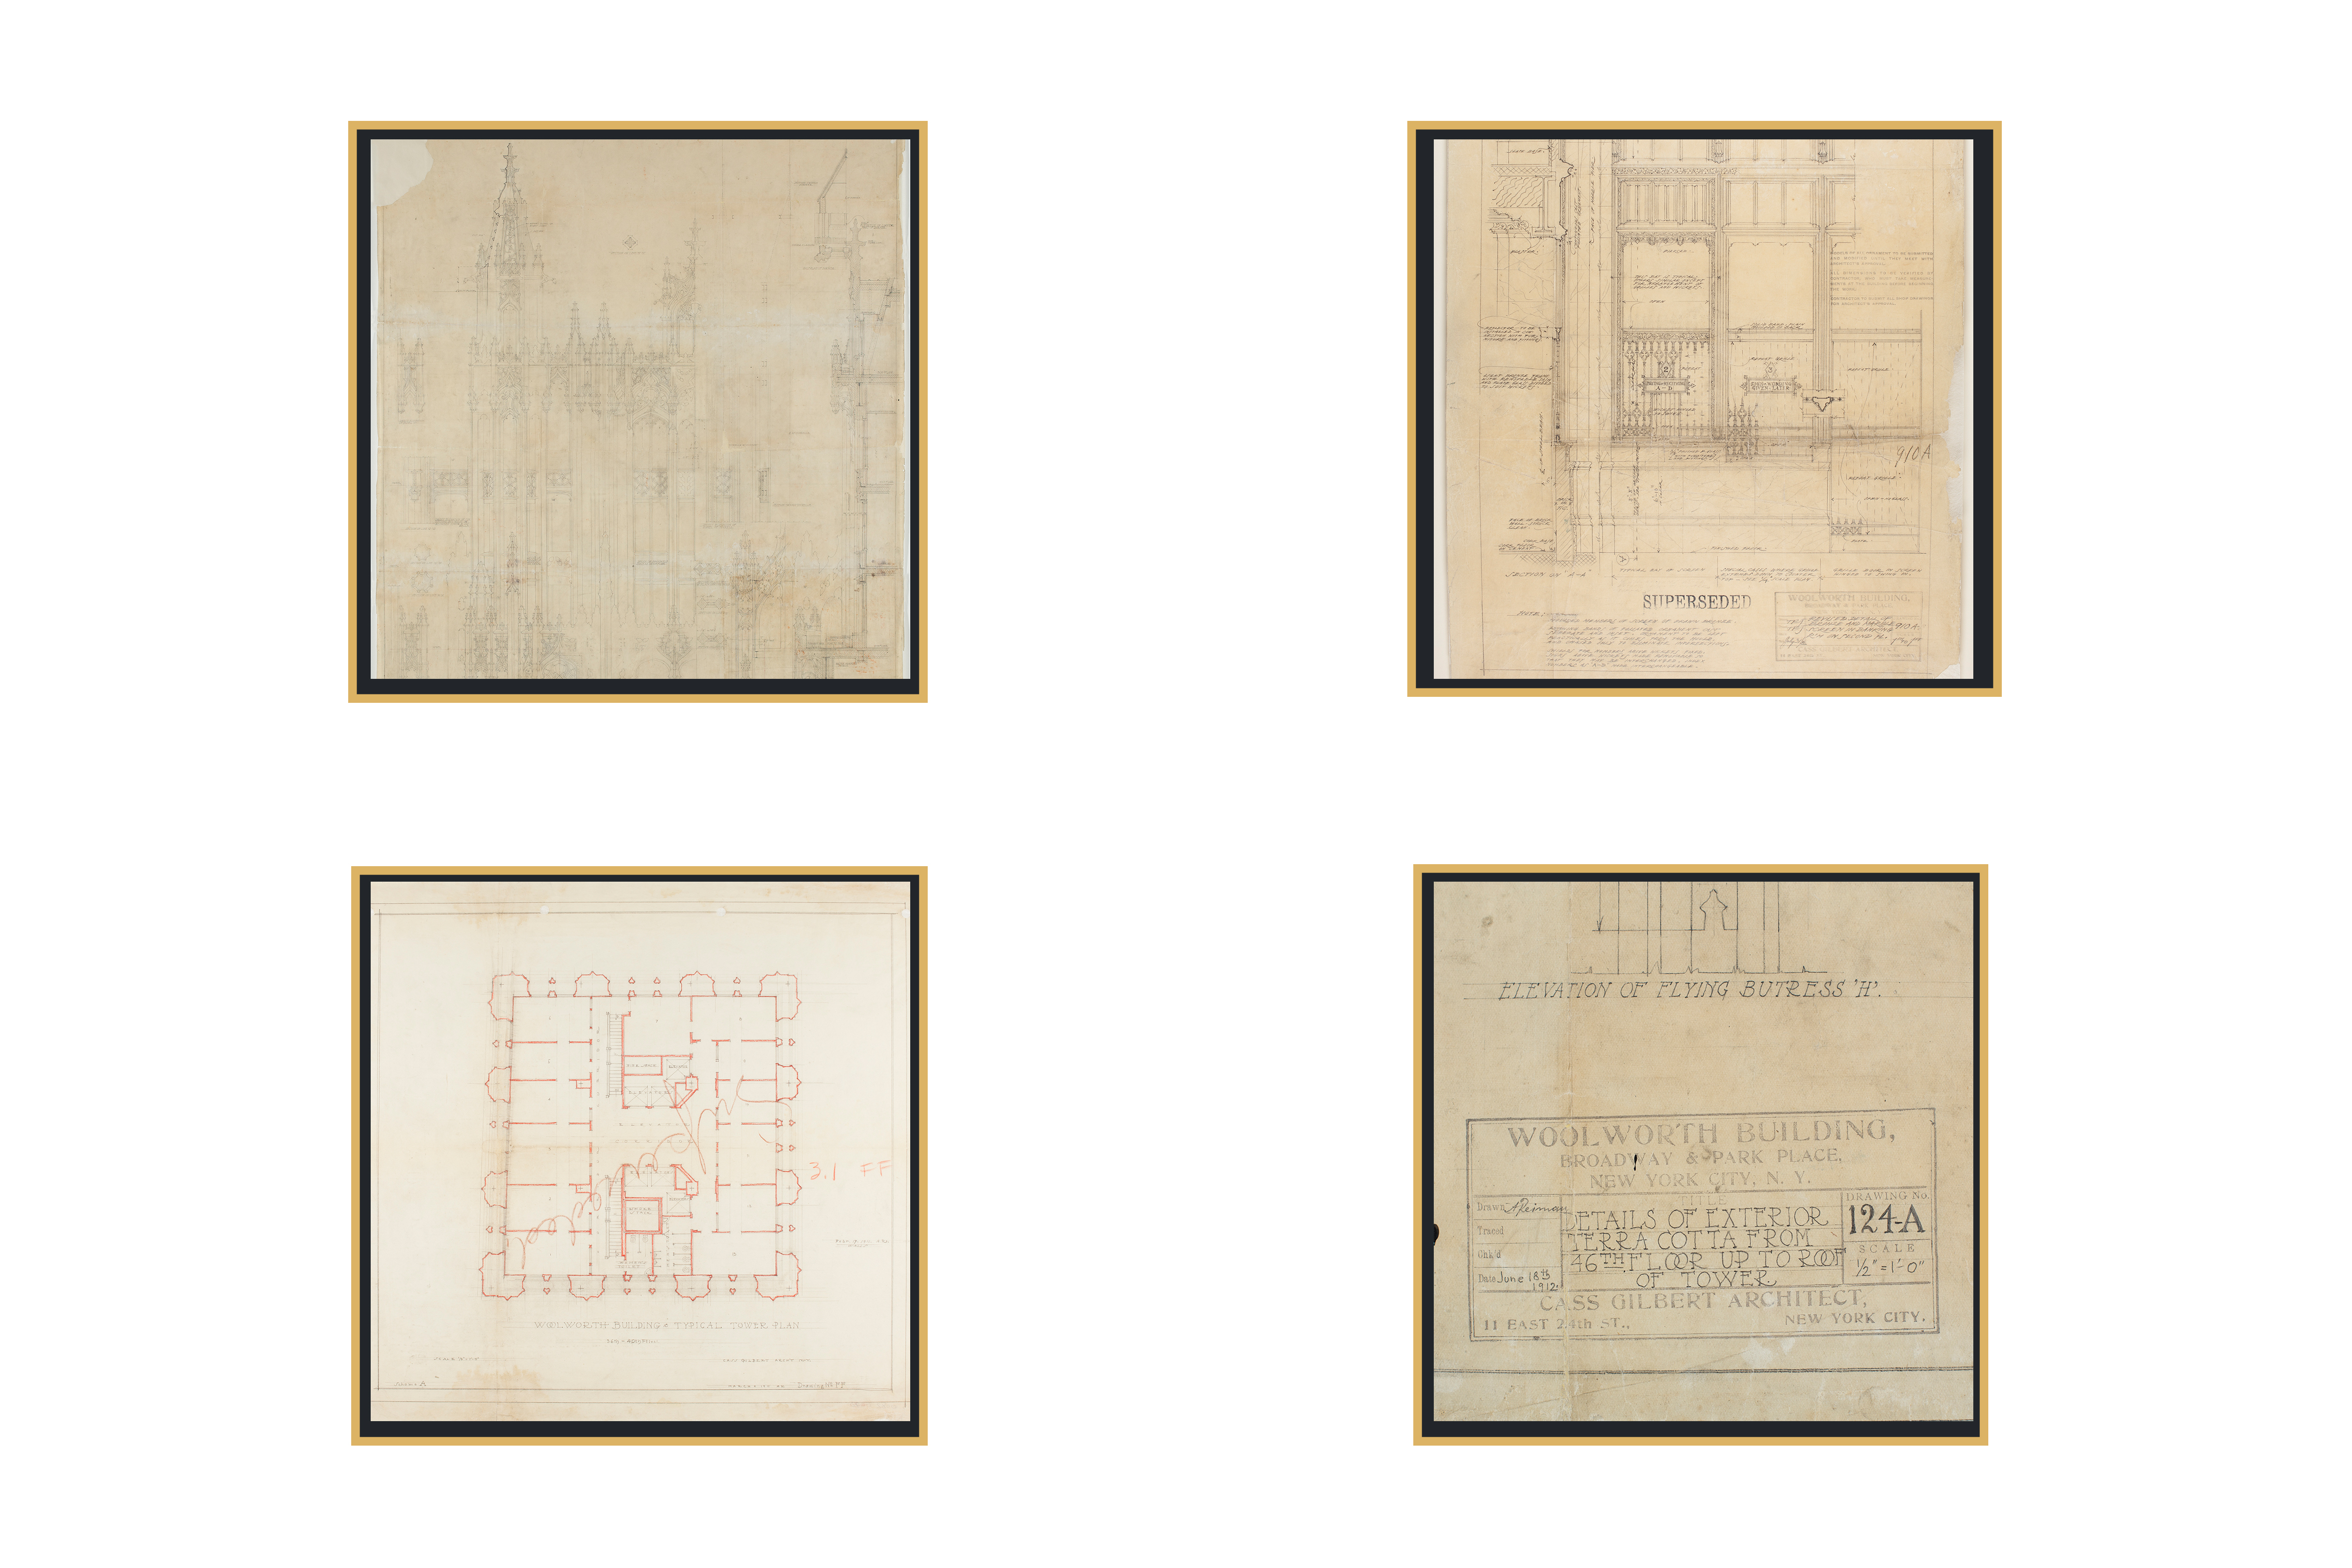 working drawings of the Woolworth Building by Cass Gilbert, architect, showing features of the building's exteriors, an interior floor plan, and a label identifying the building